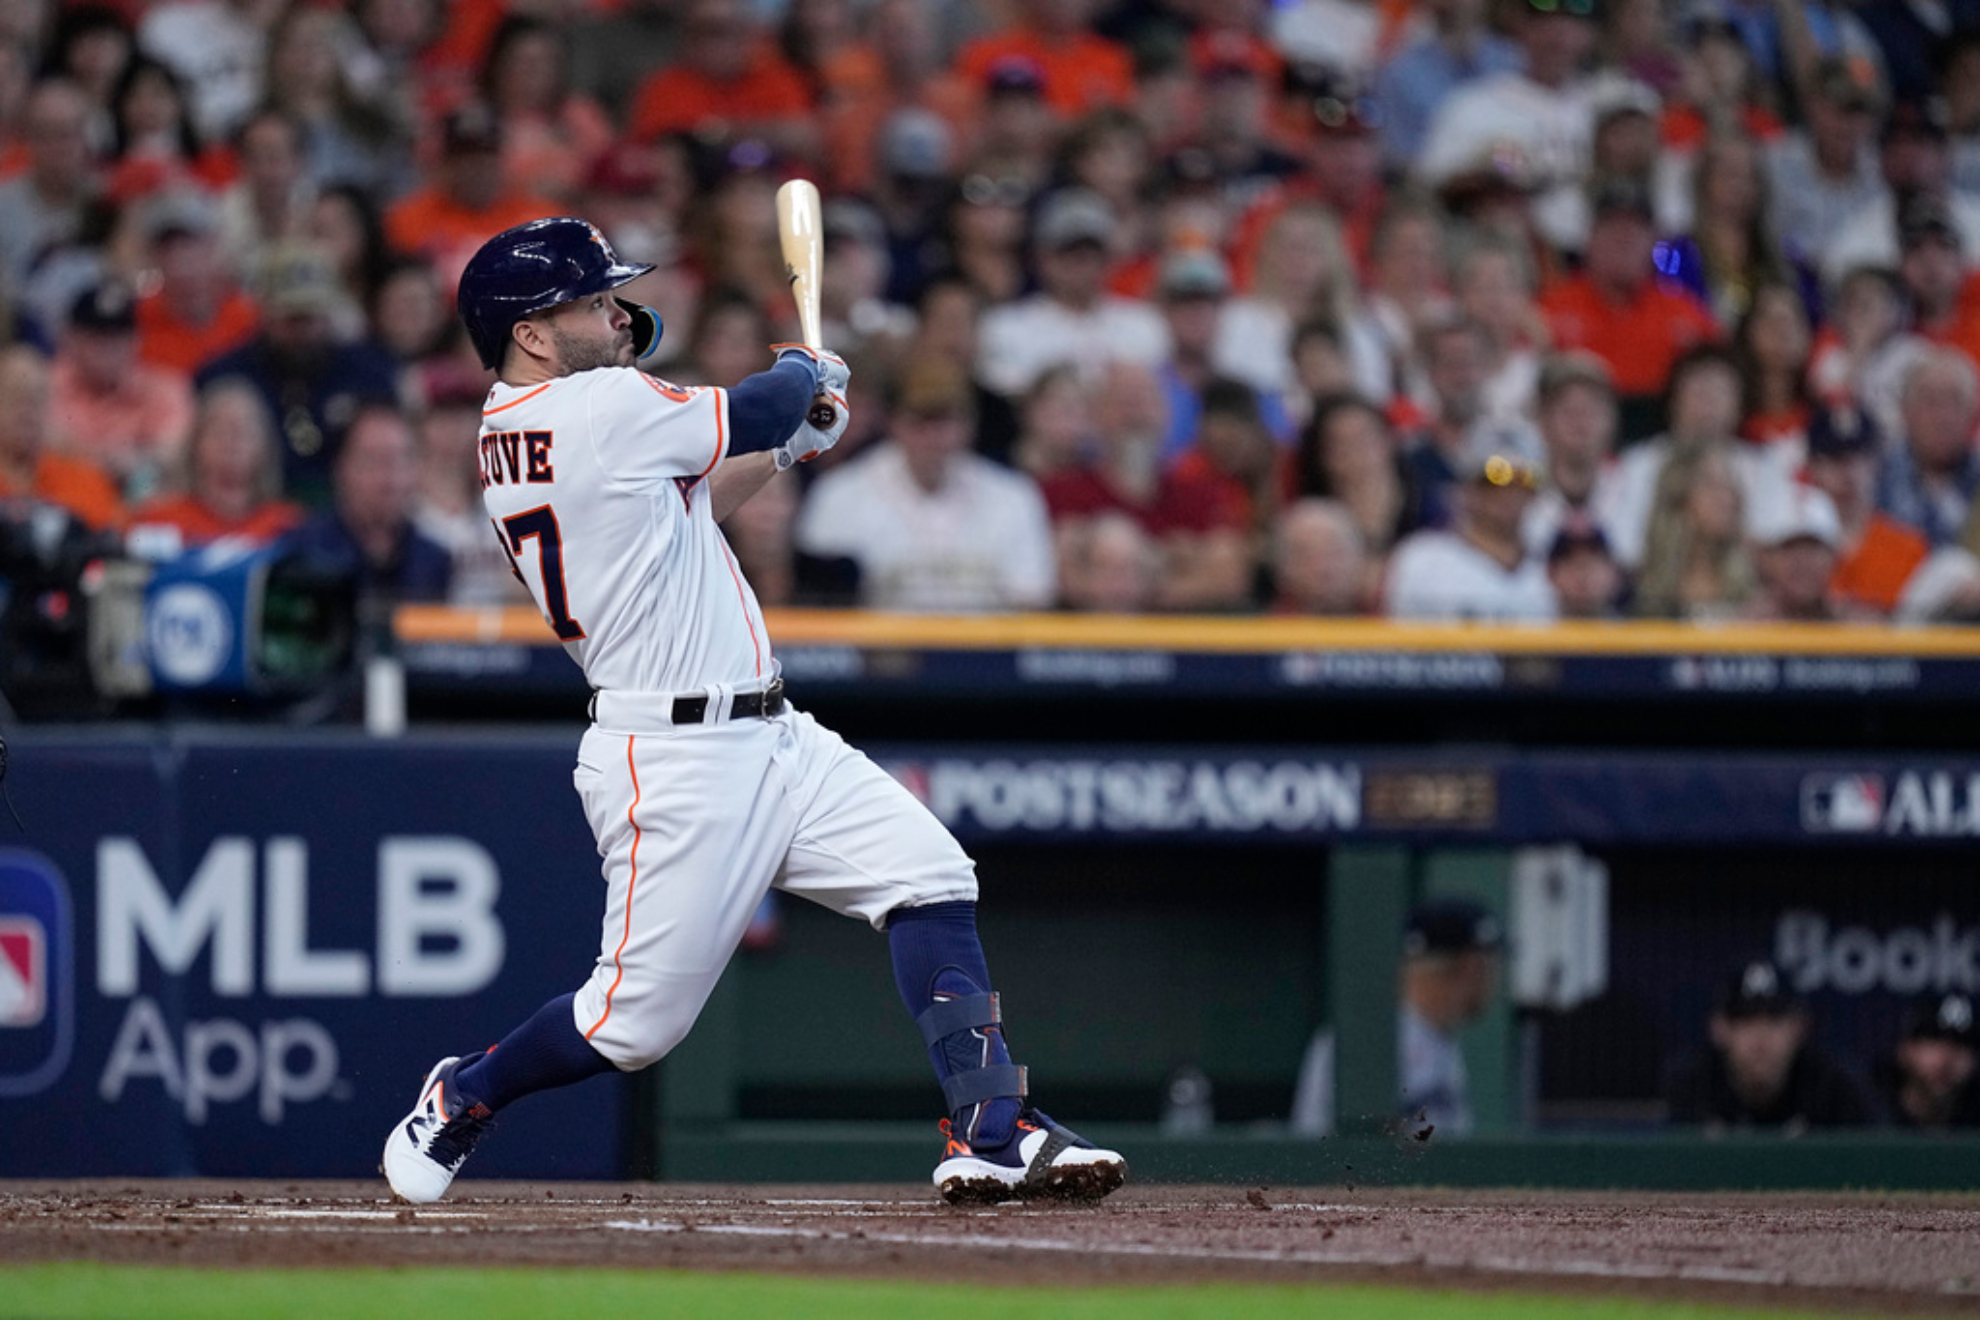 MLB Playoffs: Astros' Altuve sets the tone with first-pitch homer in AL Divisional Series vs Twins